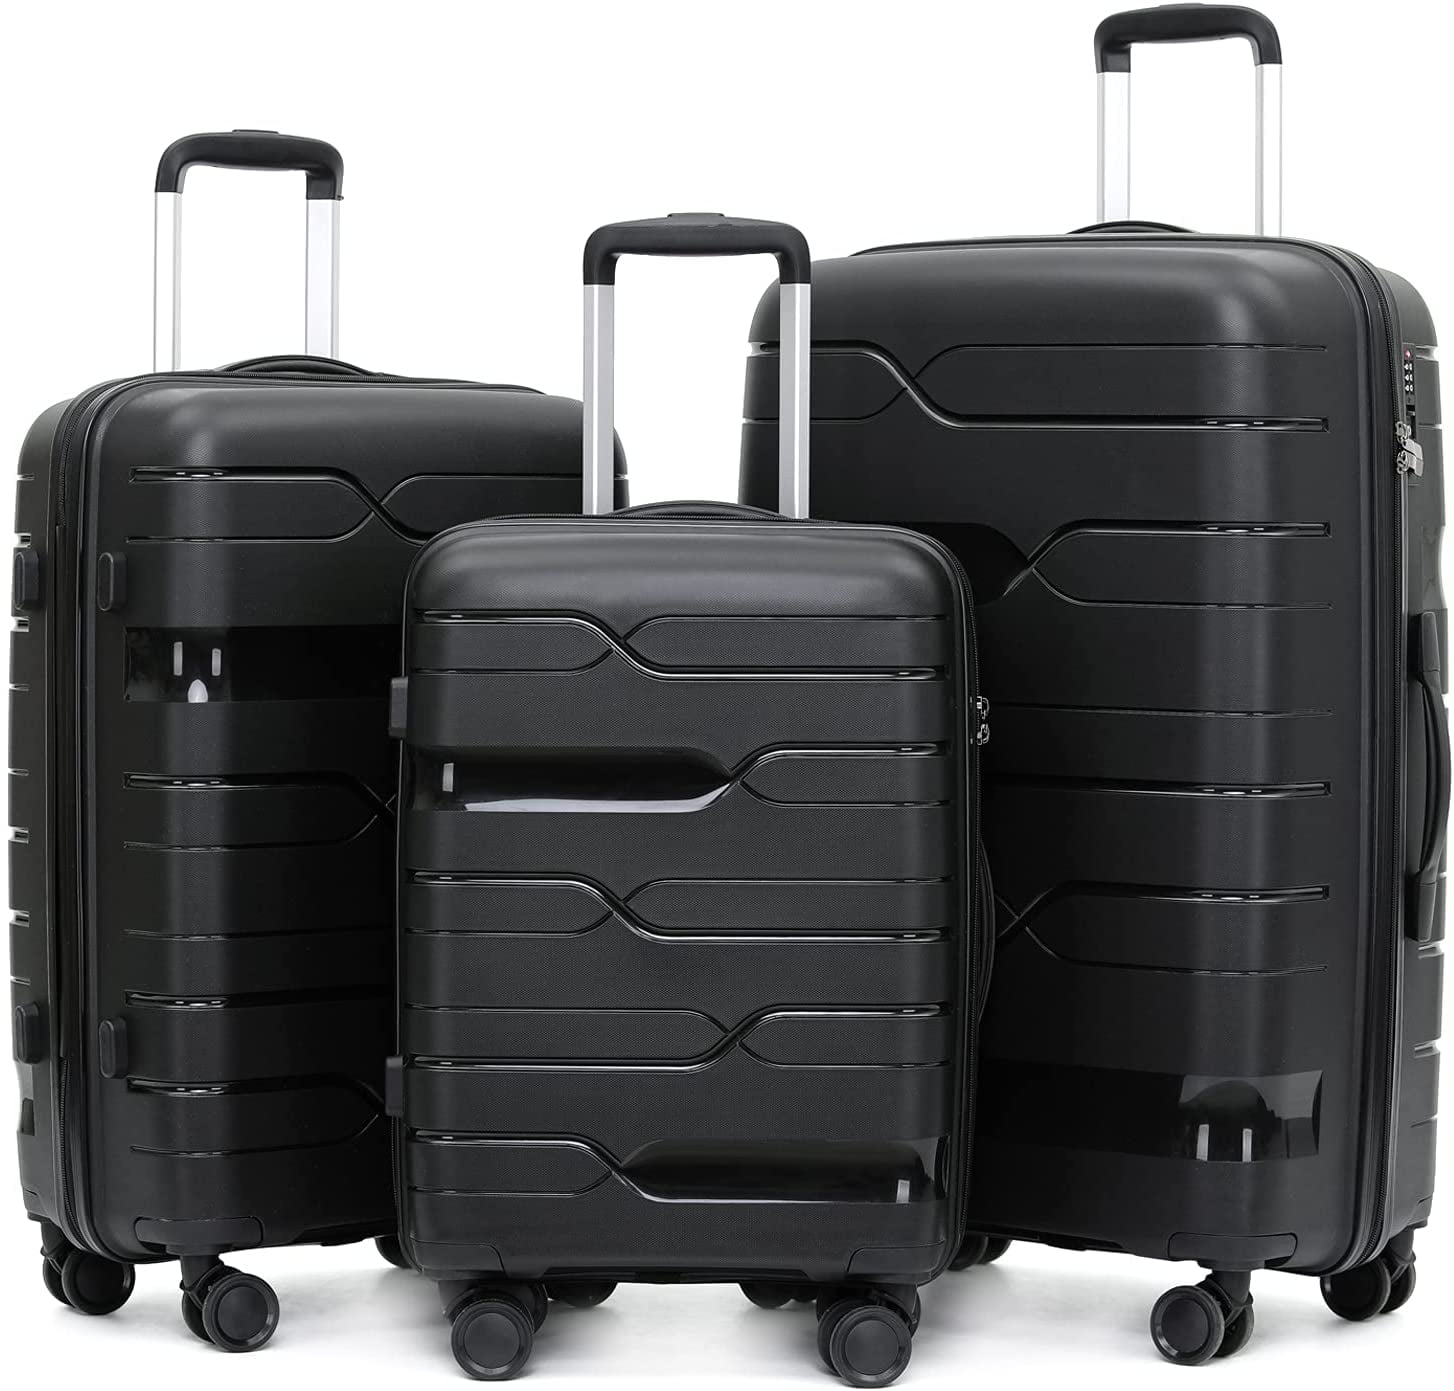 ABS+PC Suitcase Hardshell Lightweight Carry Ons with TSA Lock & Spinner Silent Wheels Luggage Sets 3 Piece Convenient for Trips Black 20/24/28 